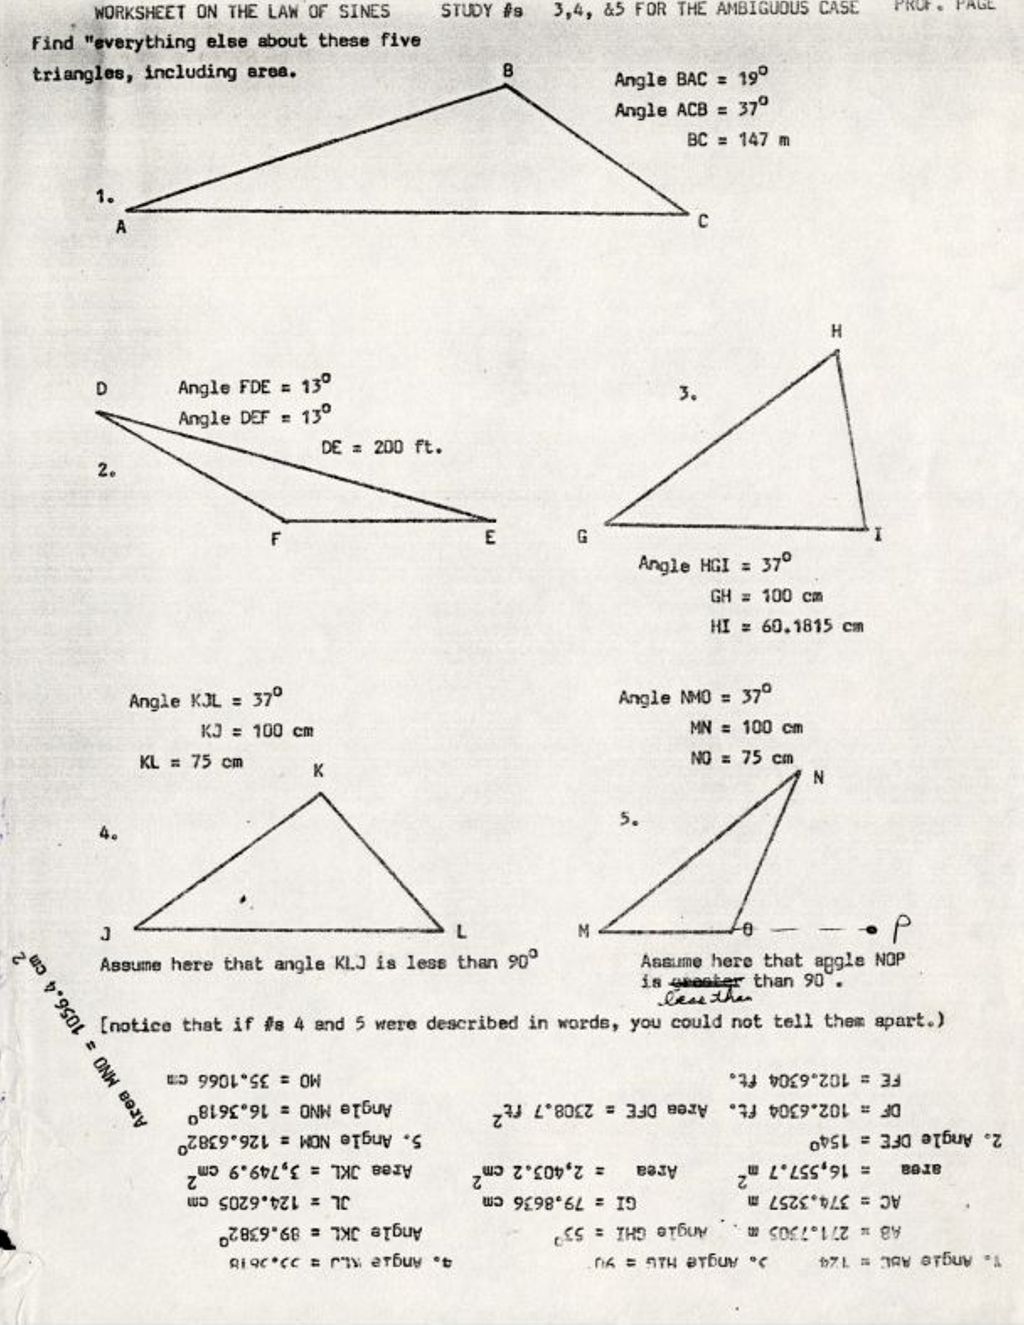 Miniature of Worksheet of the Law of Sines Study #s